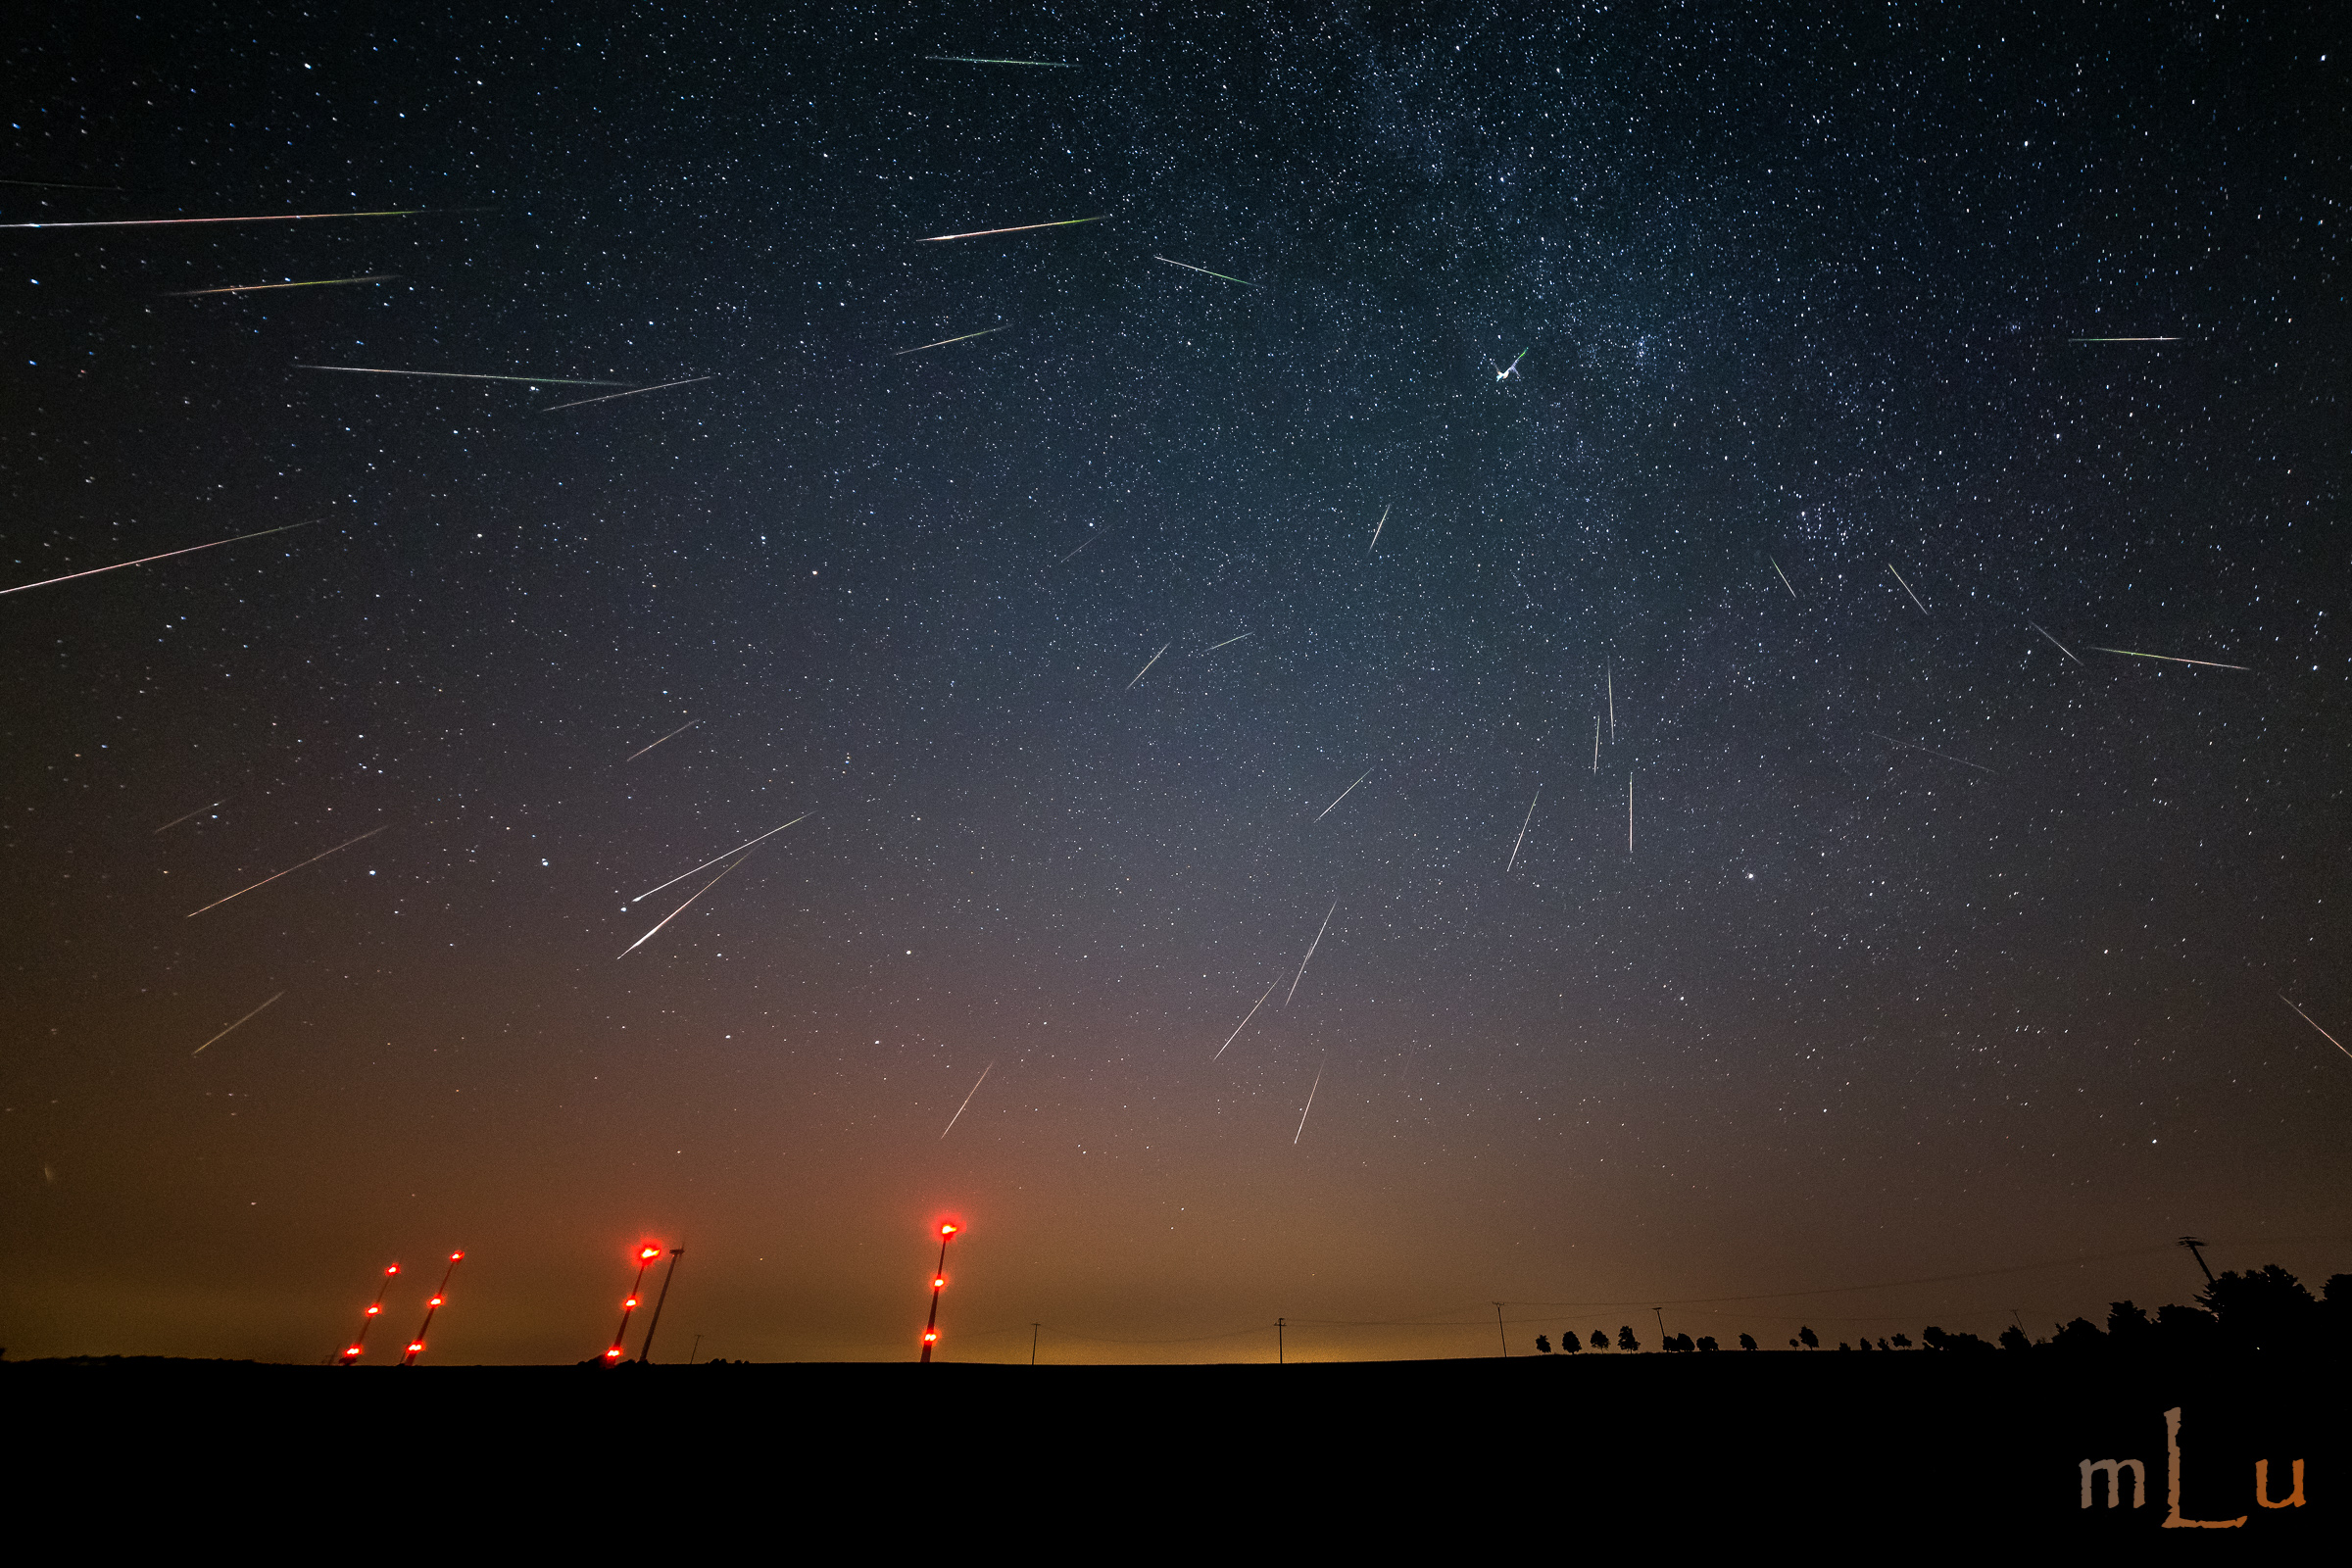 A night sky filled with numerous shooting stars during the Perseid meteor shower.